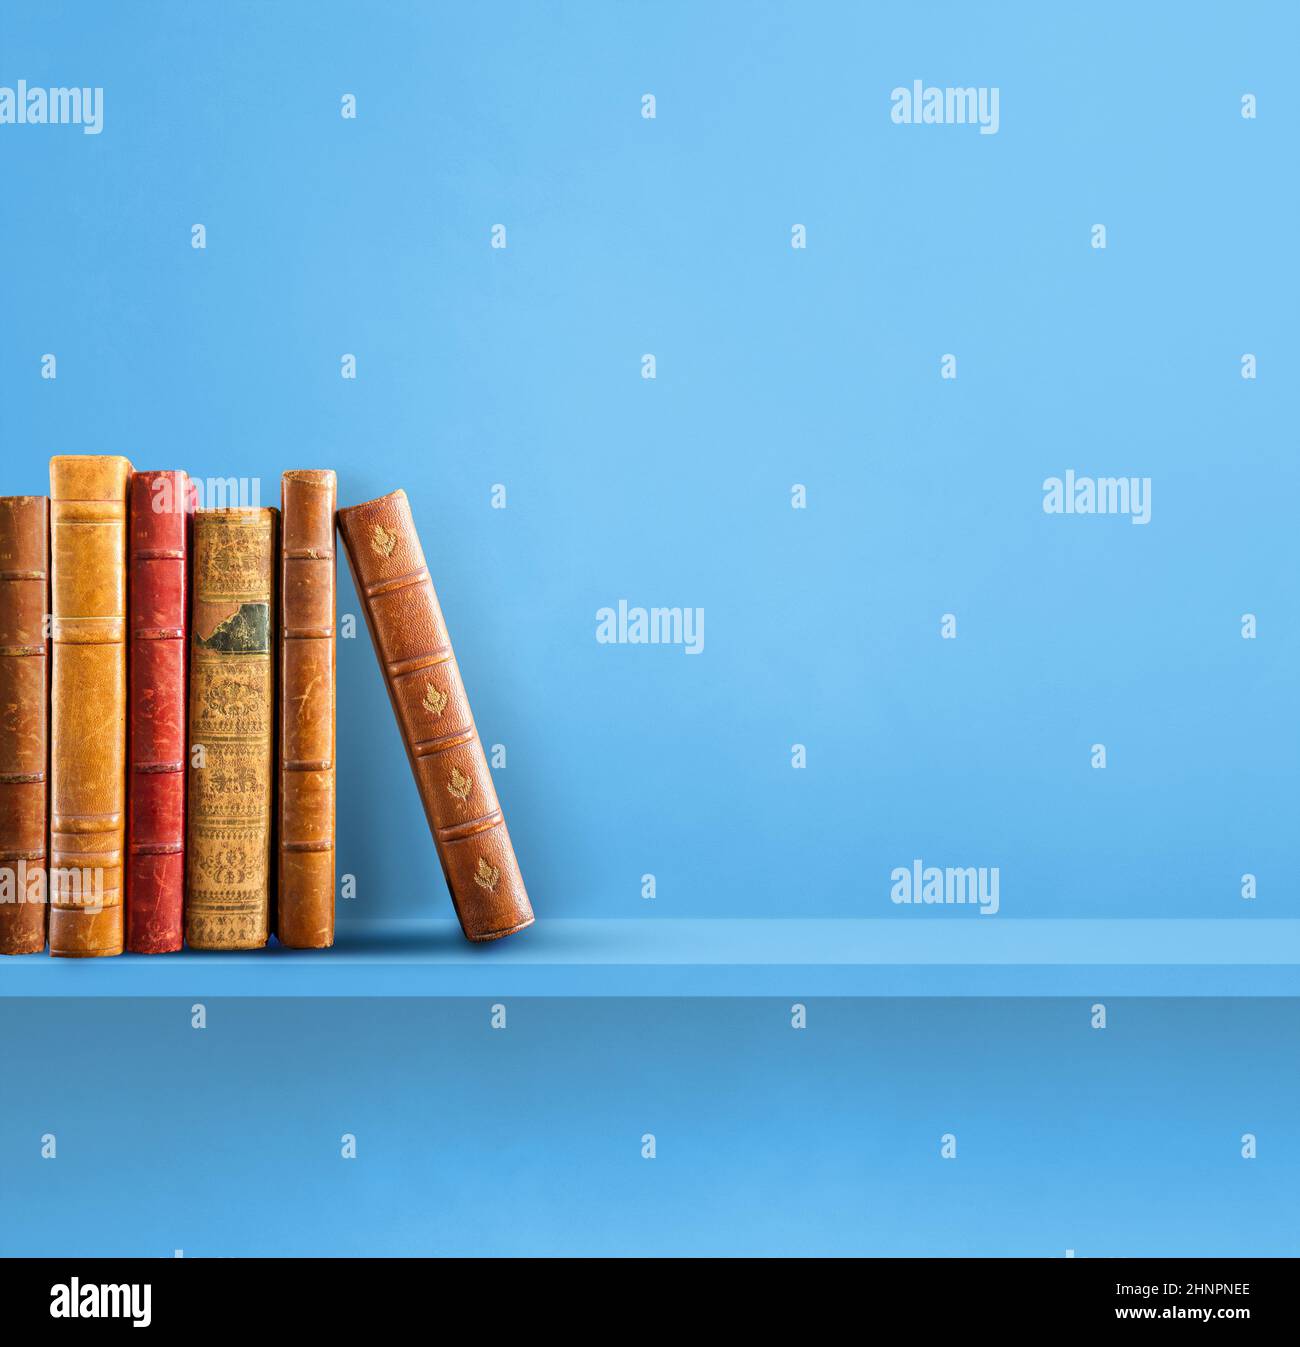 Row of old books on blue shelf. Square background Stock Photo